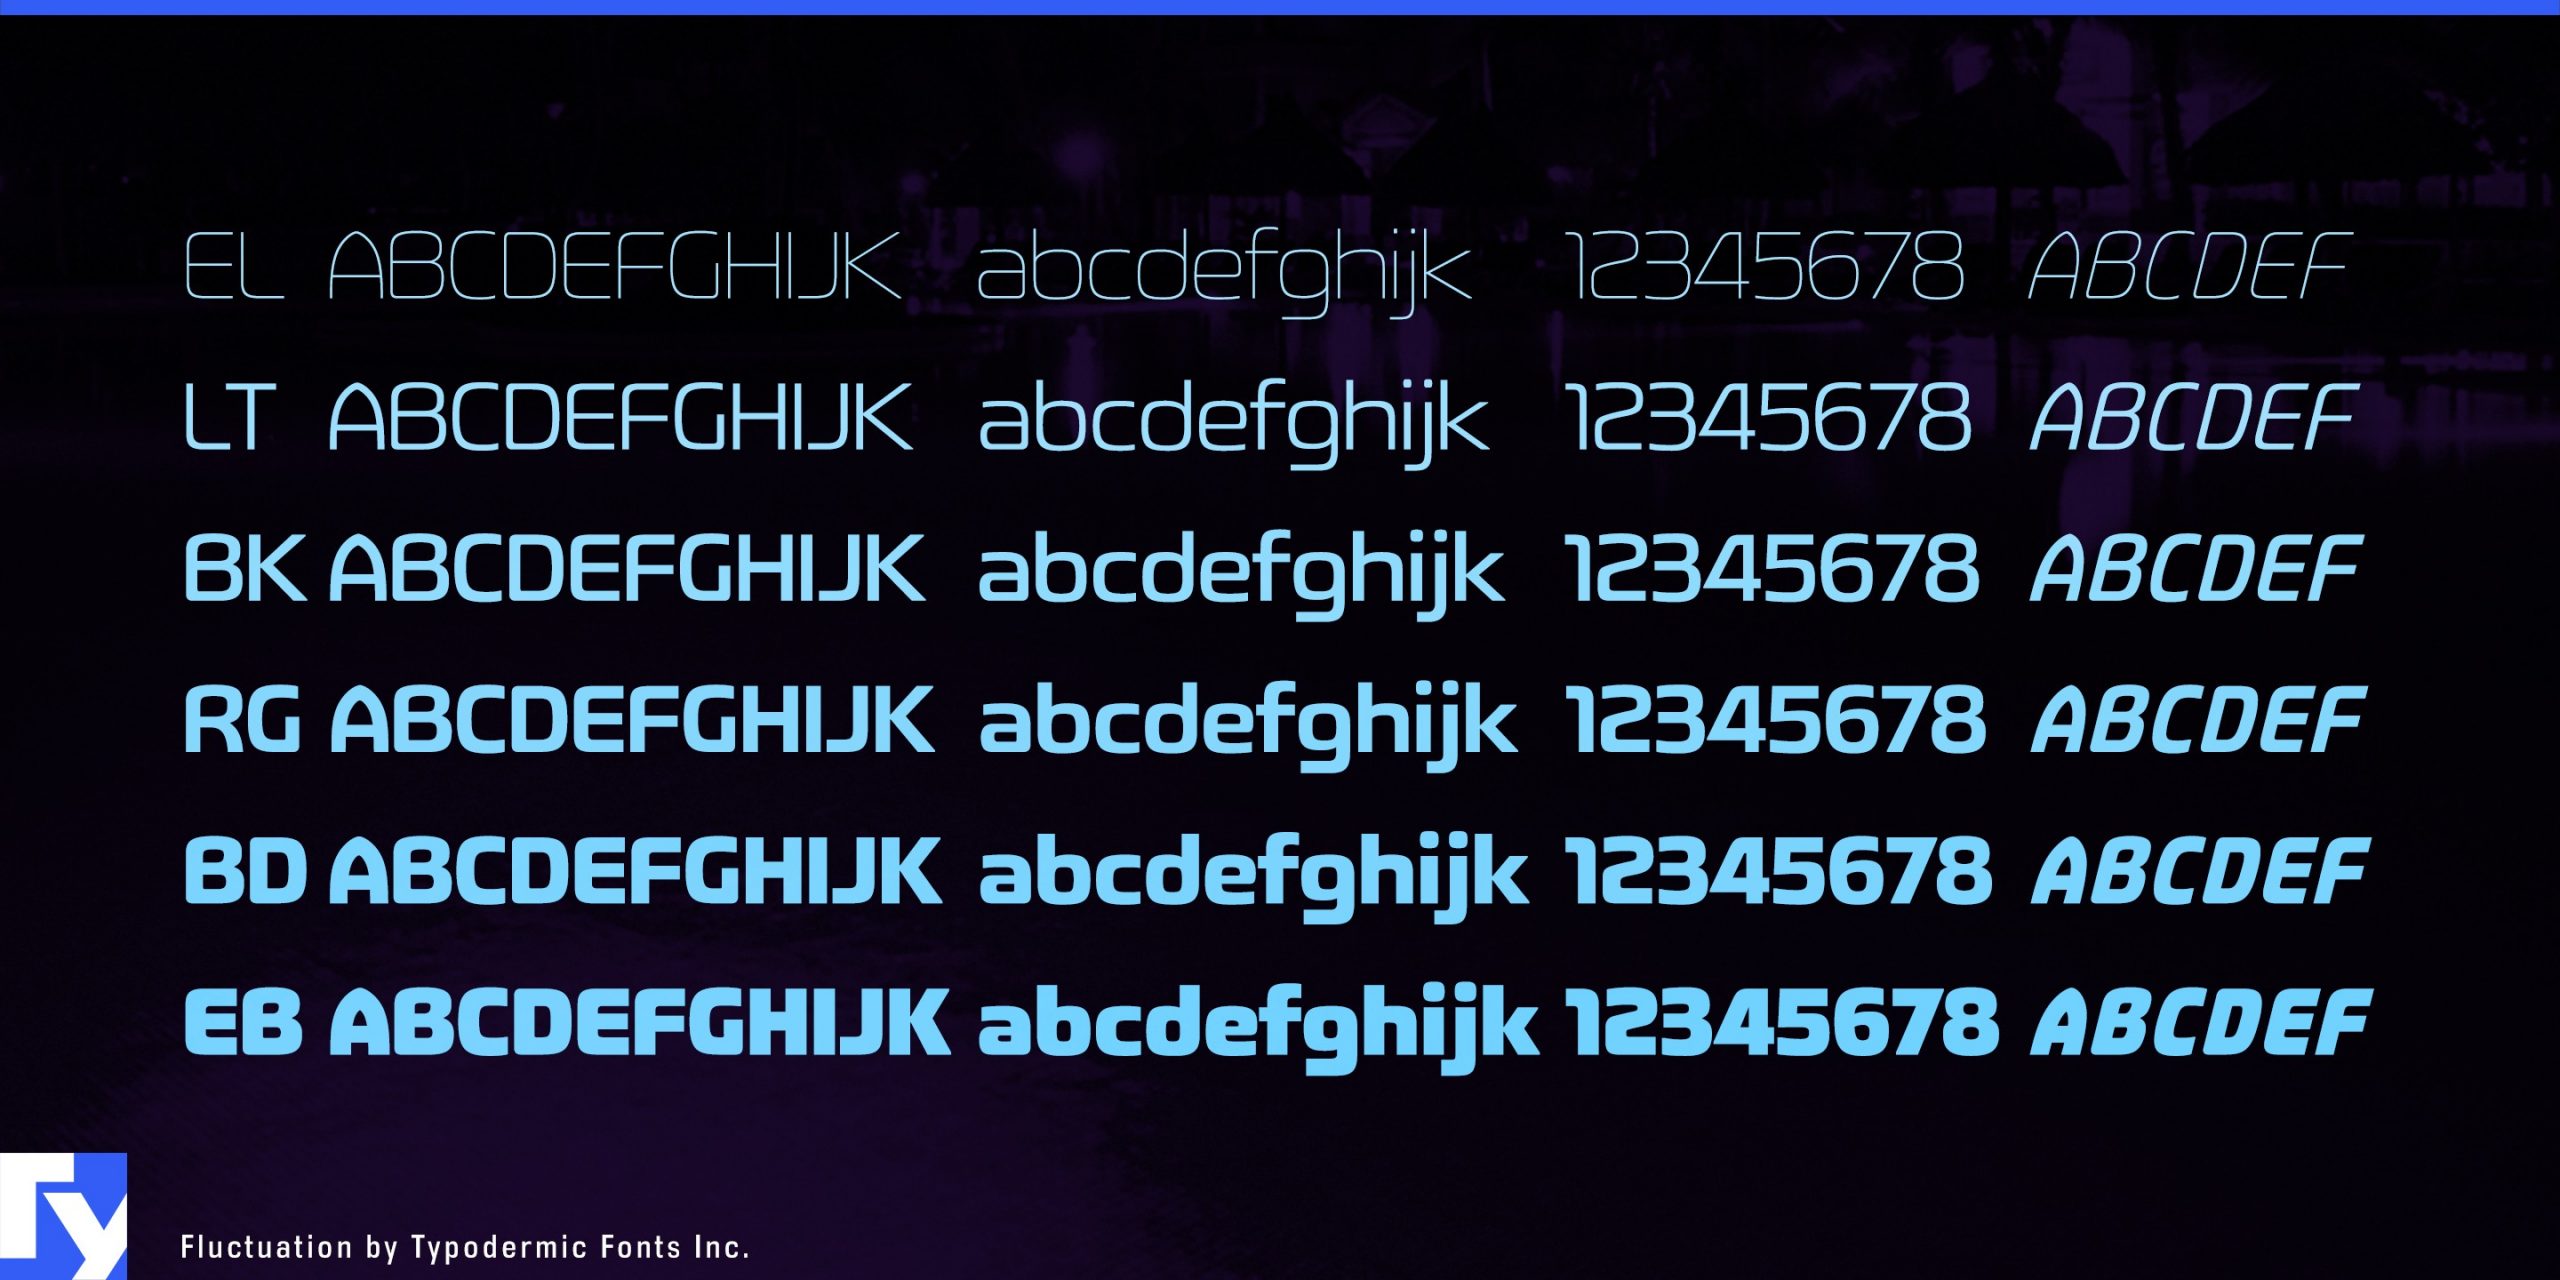 Attention-Grabbing Impact: Fluctuation Typeface Shines Bright